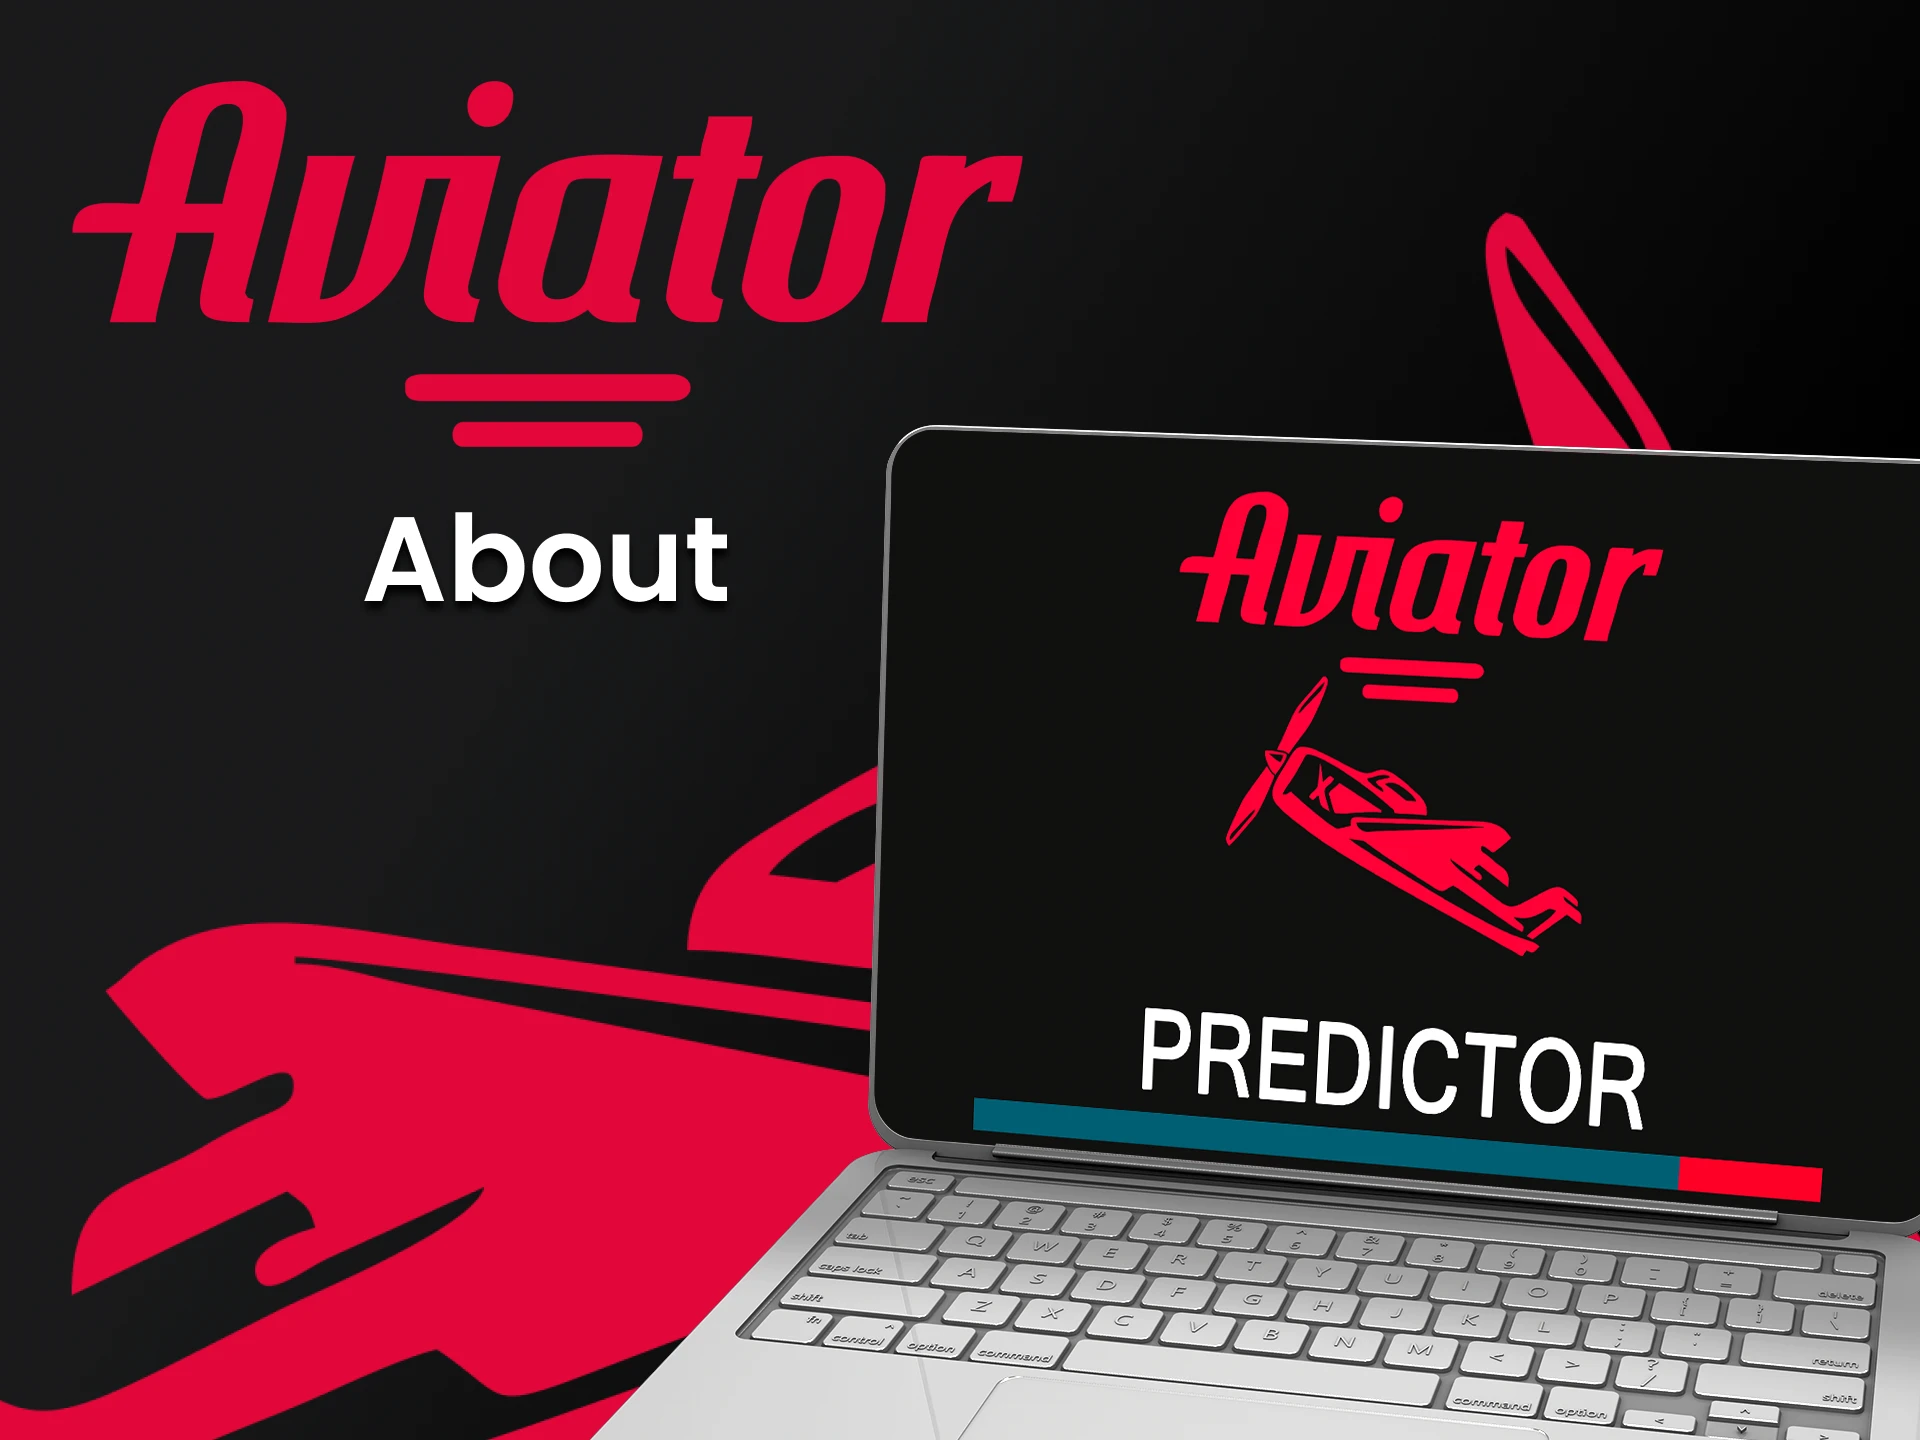 We will tell you everything about Predictor for Aviator.